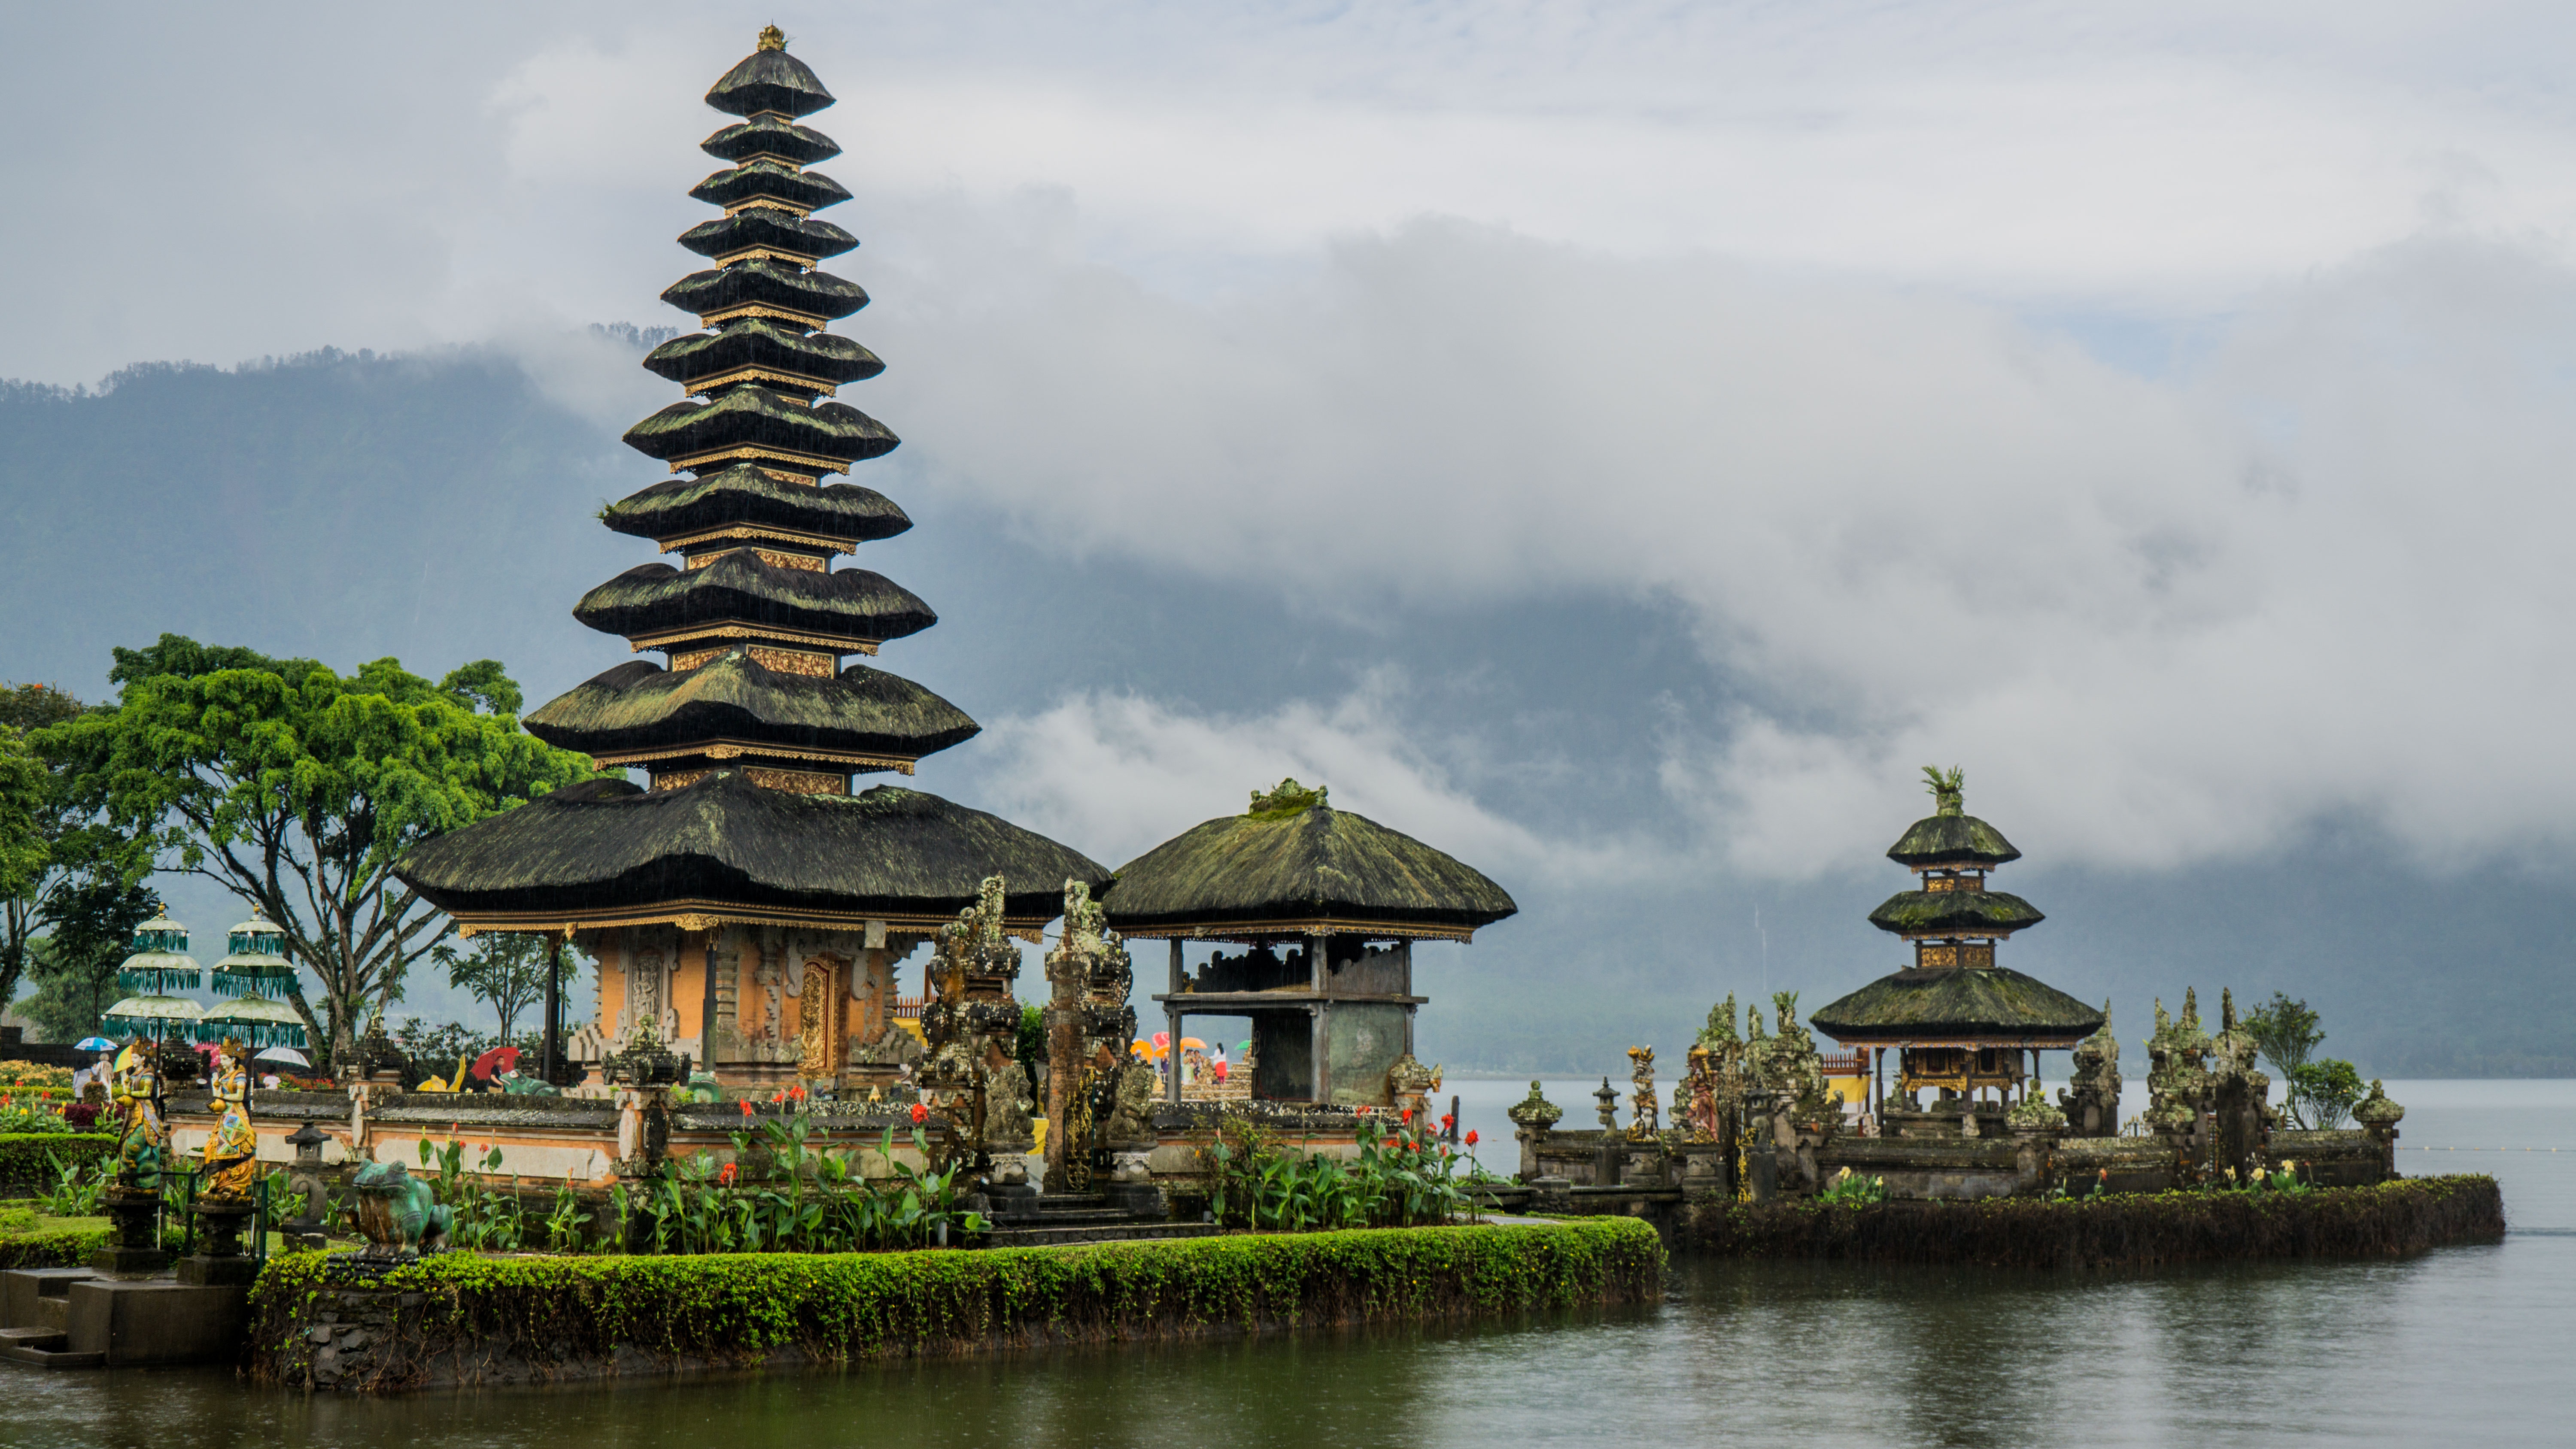 Bali Considers New Rules To Attract “Quality” Visitors After Tourists Disrespect Hindu Temples